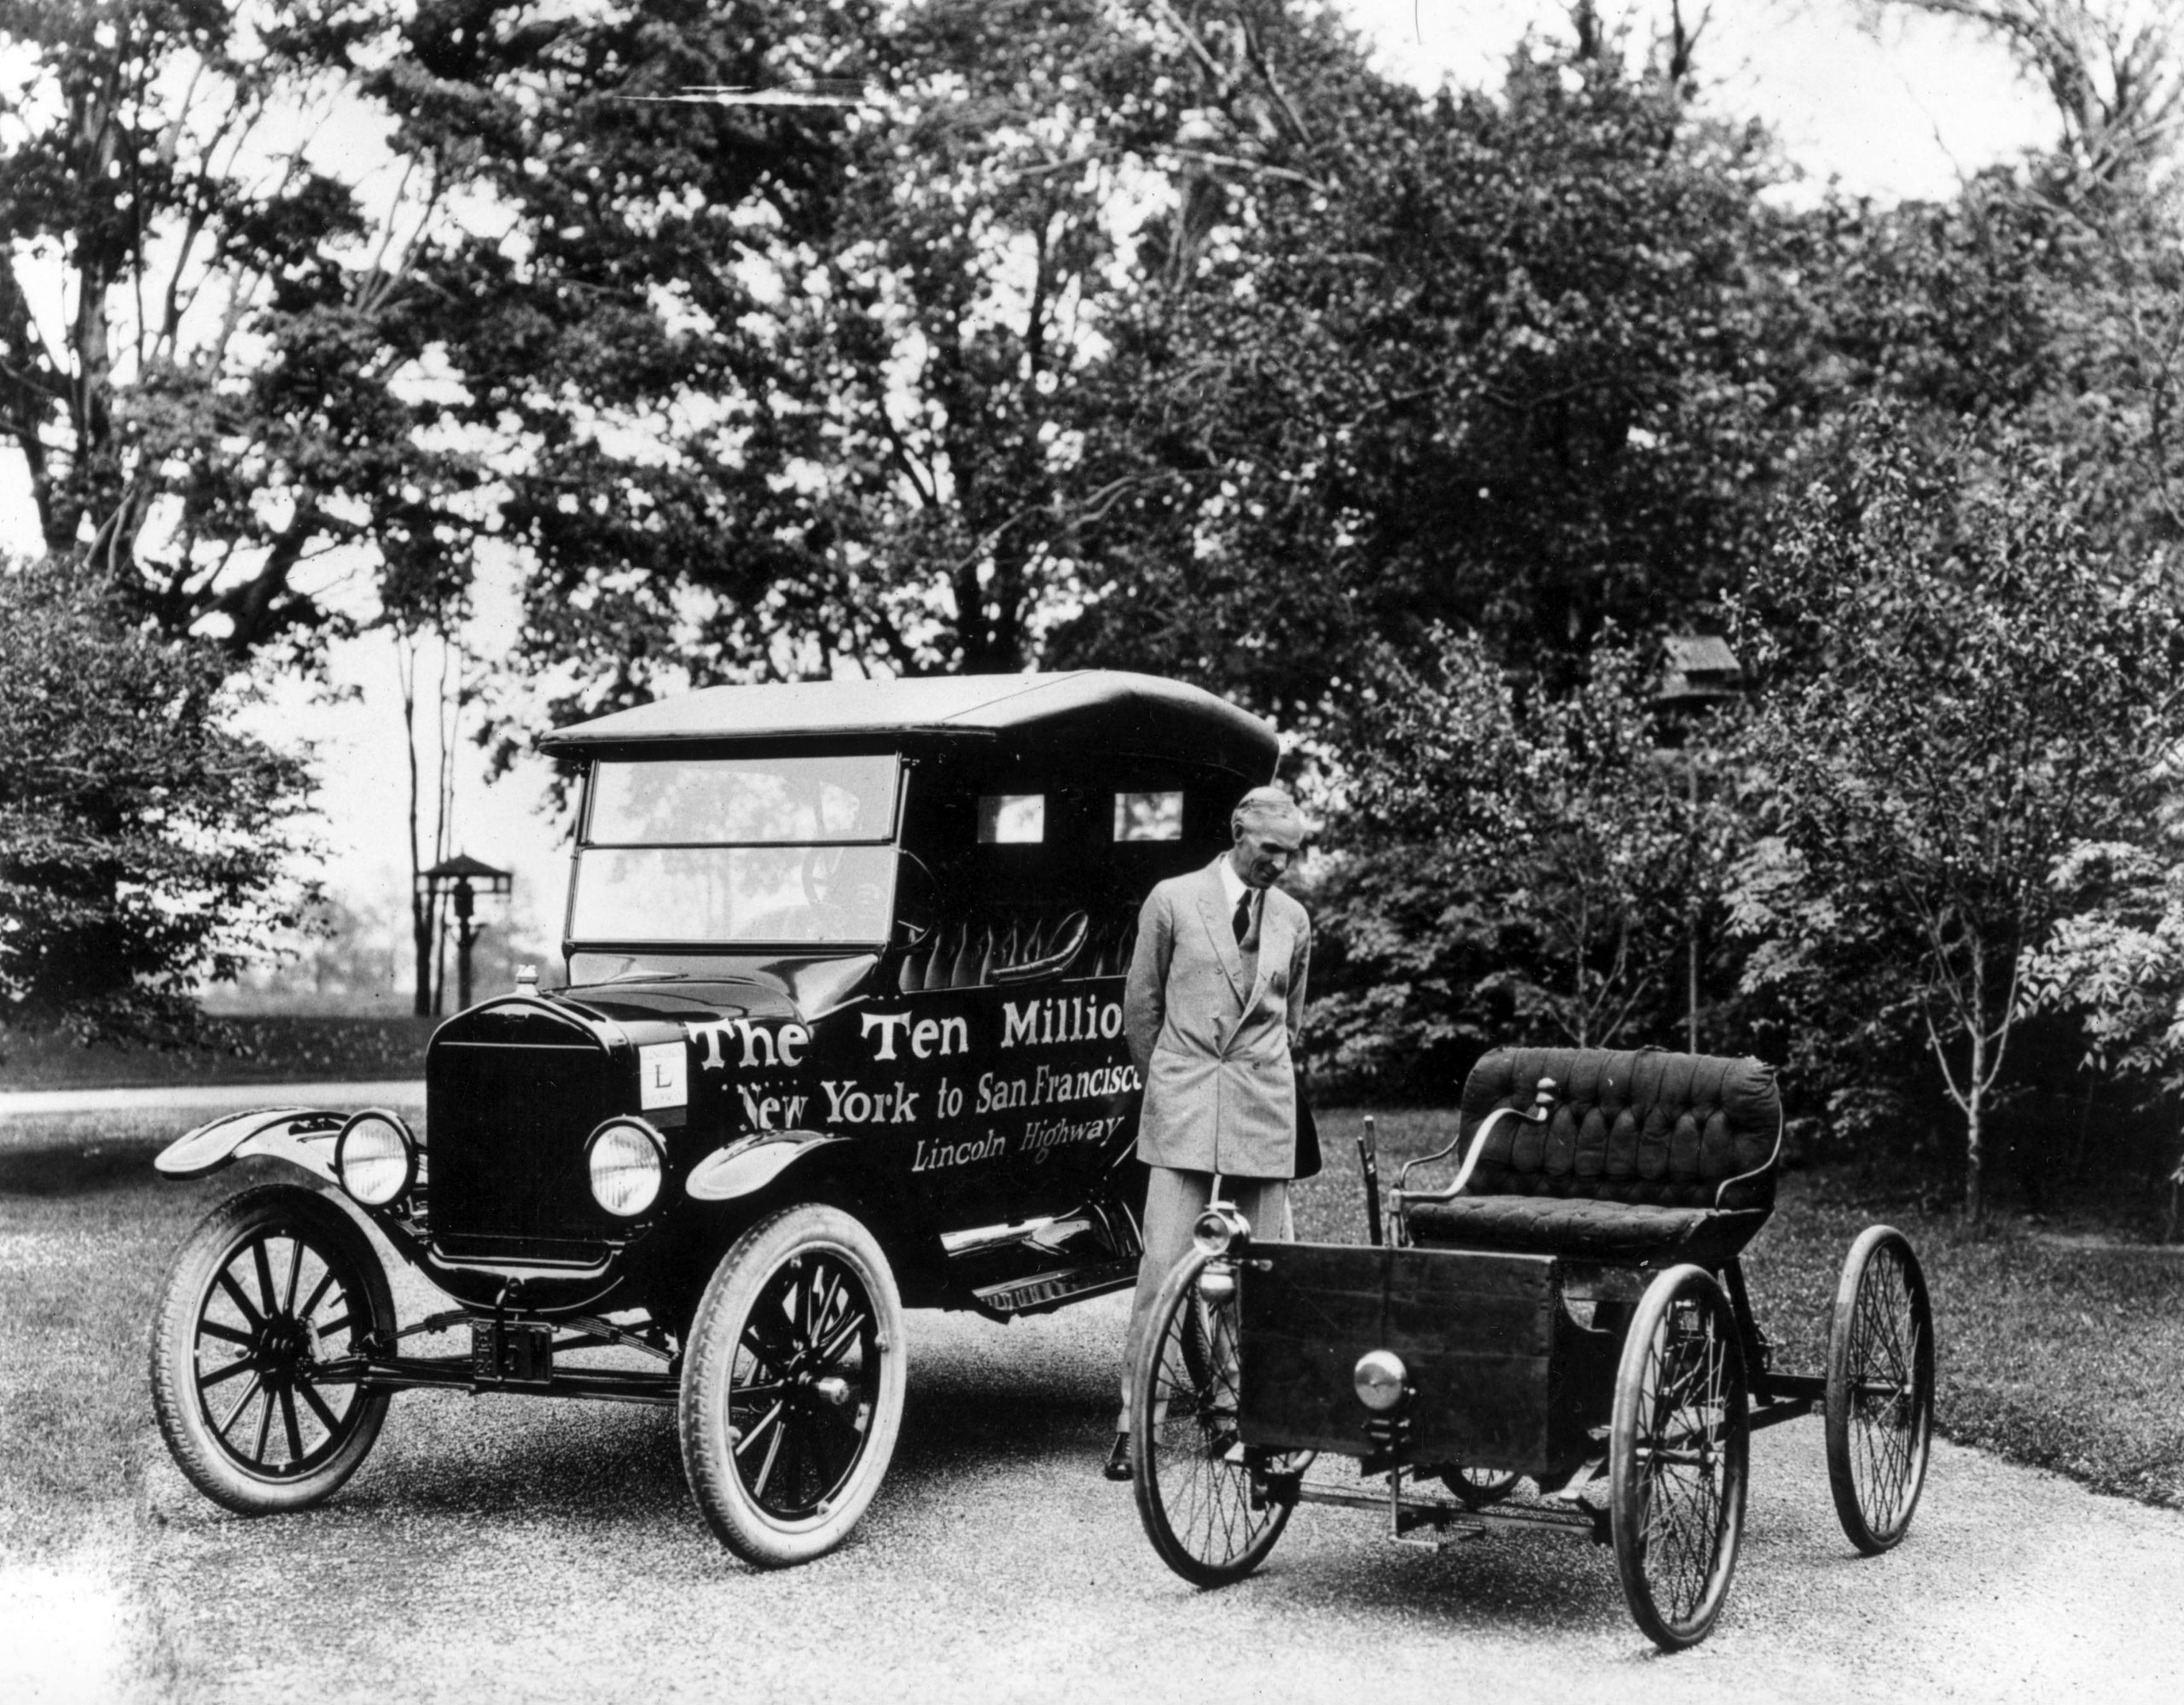 American motor vehicle industry pioneer Henry Ford (1863 - 1947) standing next to the first and the ten millionth Model-T Ford, 1924.